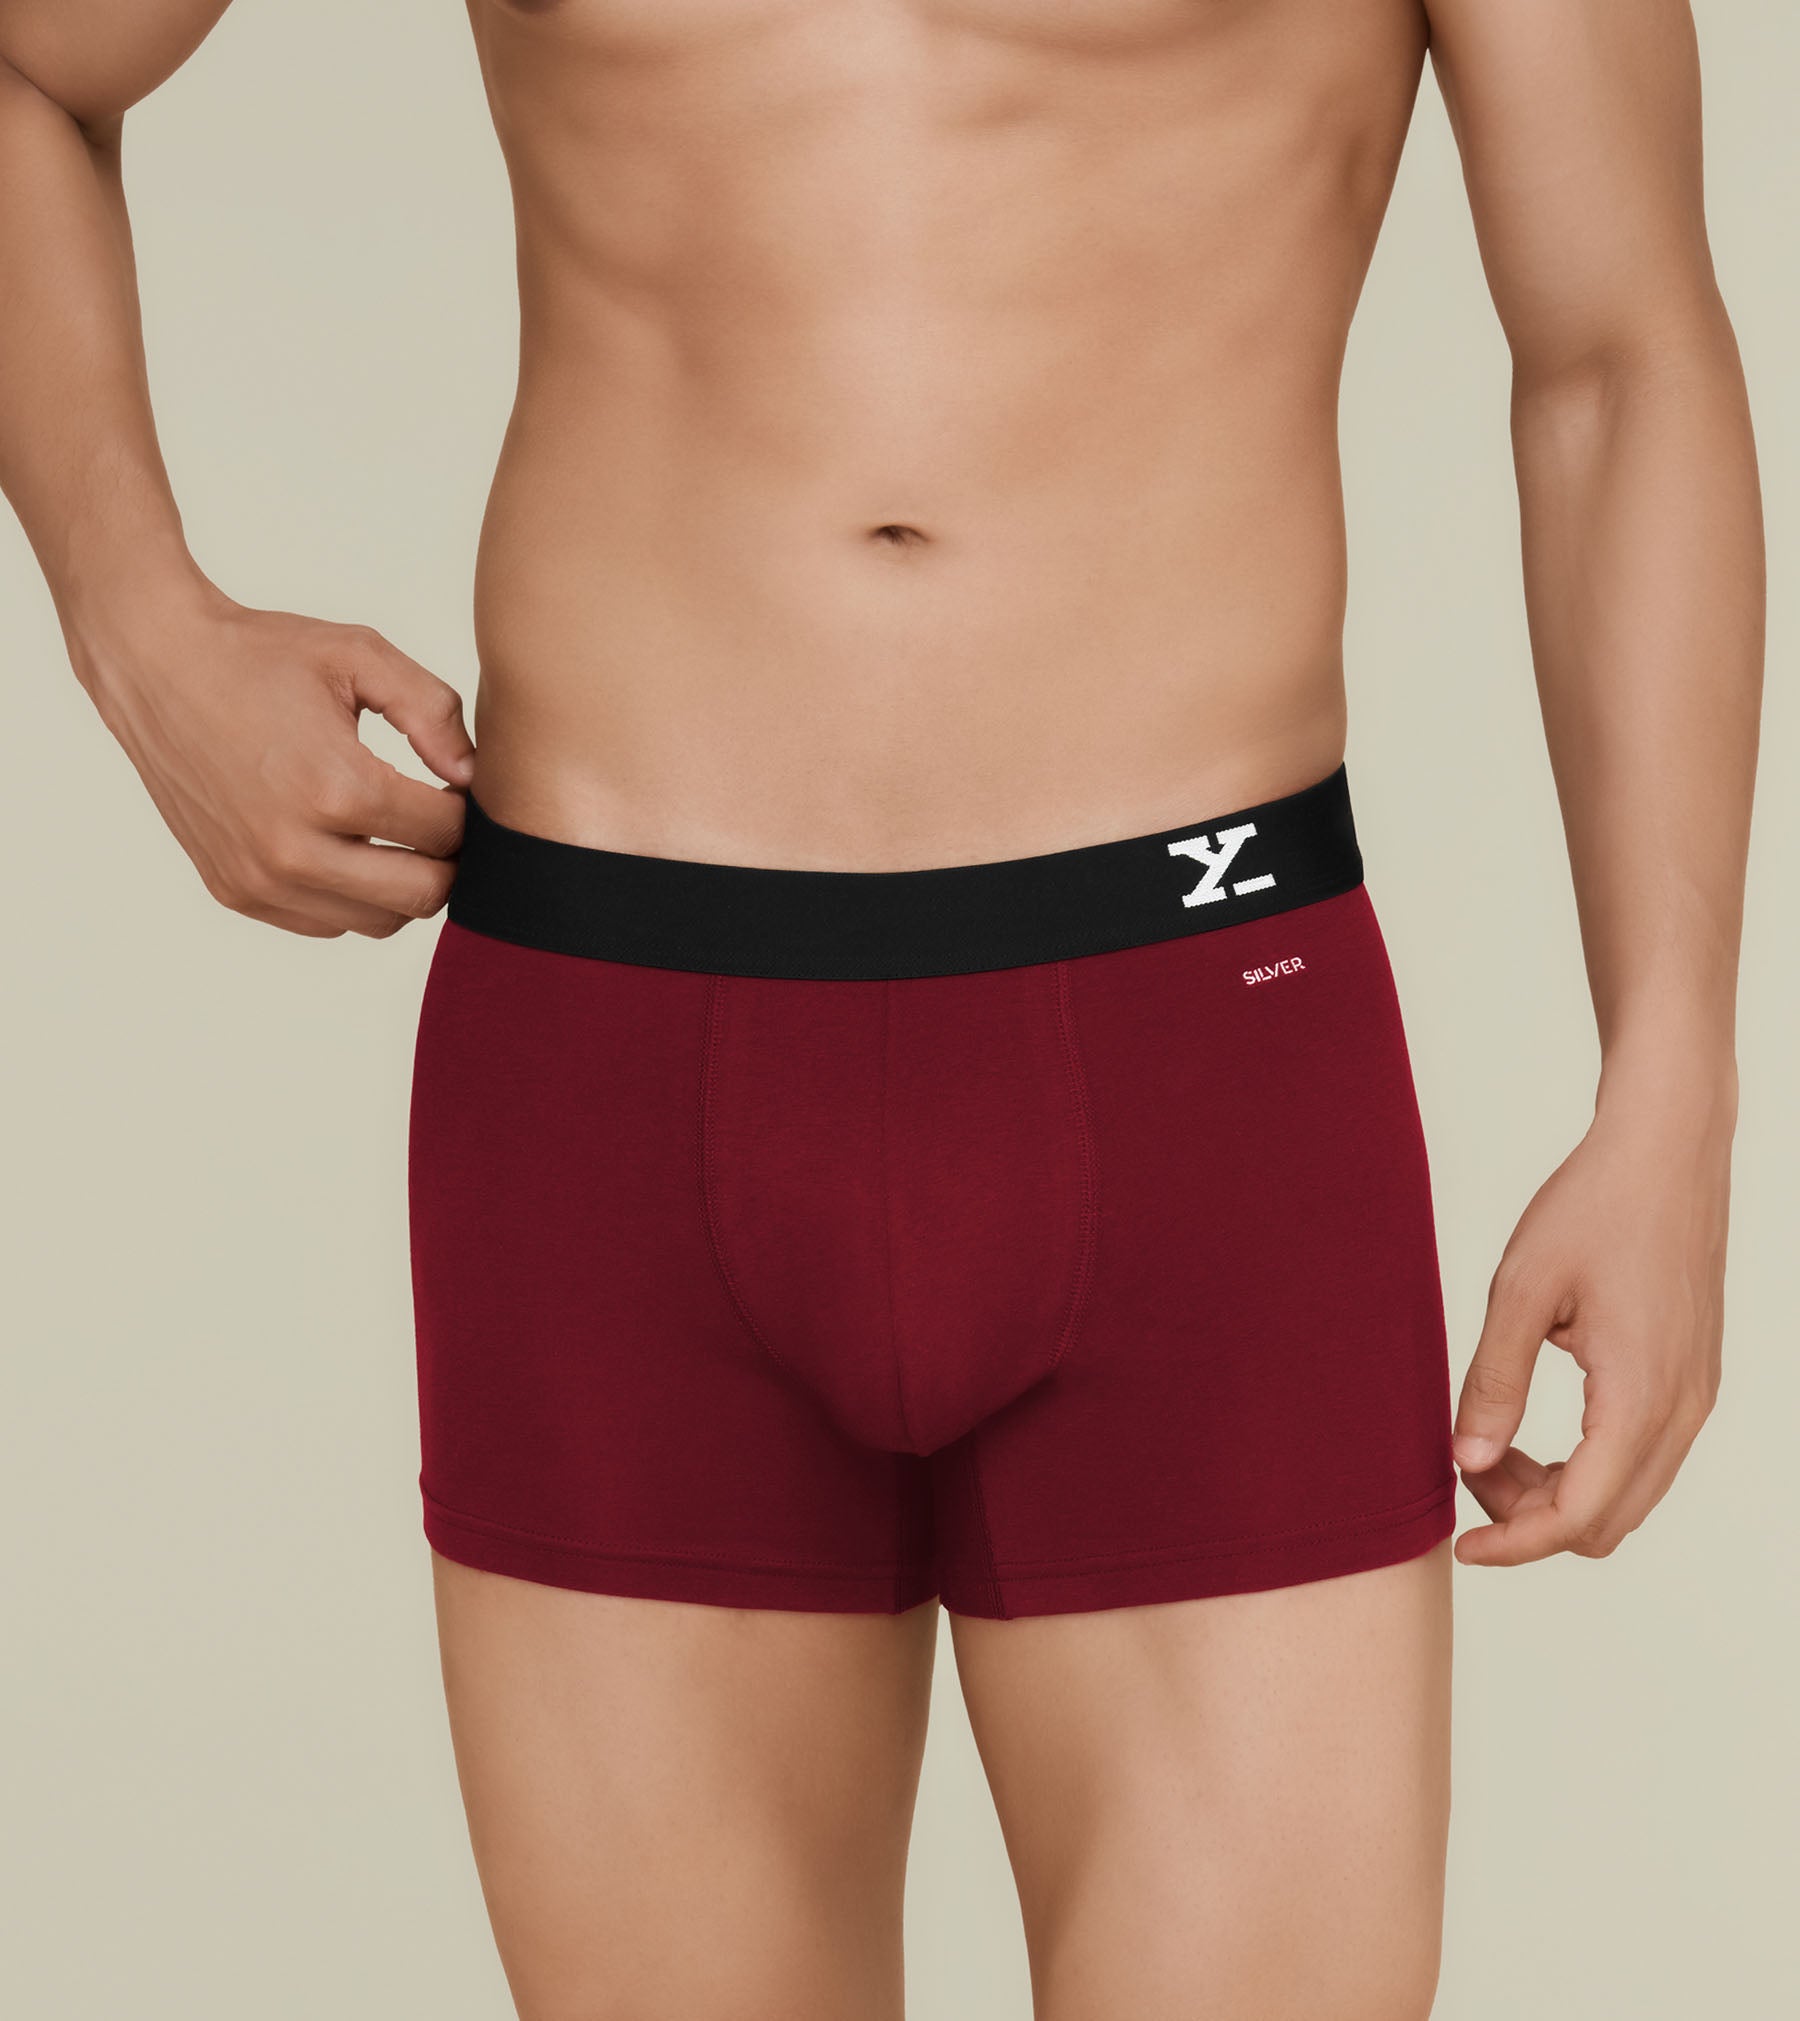 Aero Silver Cotton Trunks For Men Pack of 2(Maroon, Light Blue) -  XYXX Mens Apparels